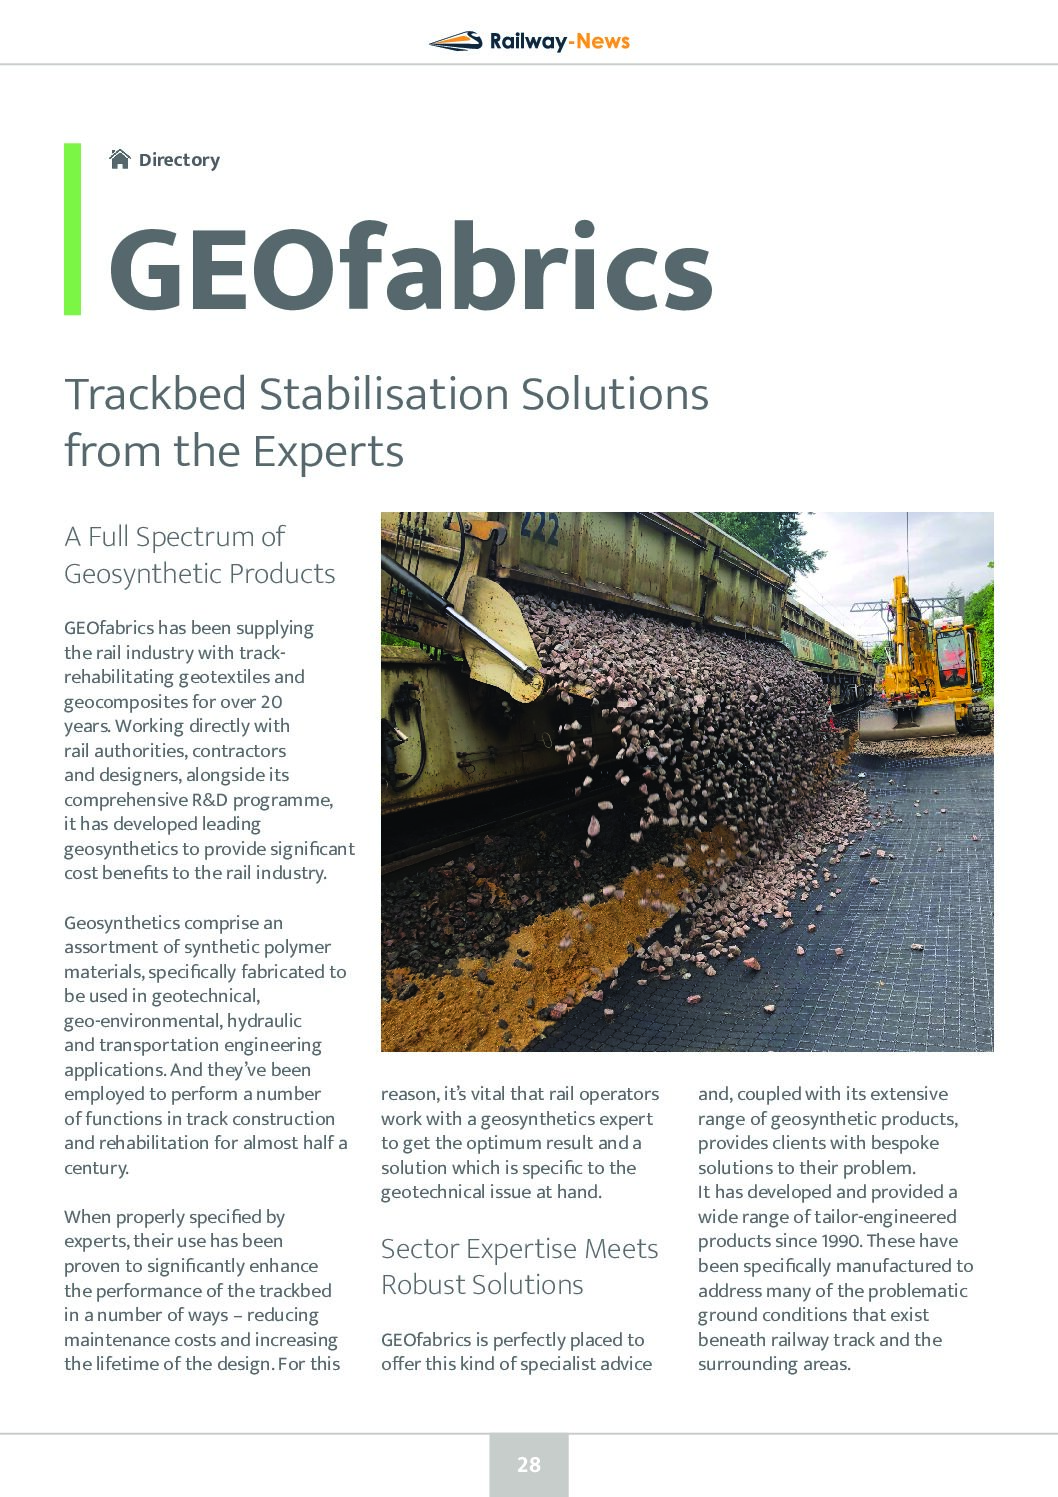 Trackbed Stabilisation Solutions from the Experts